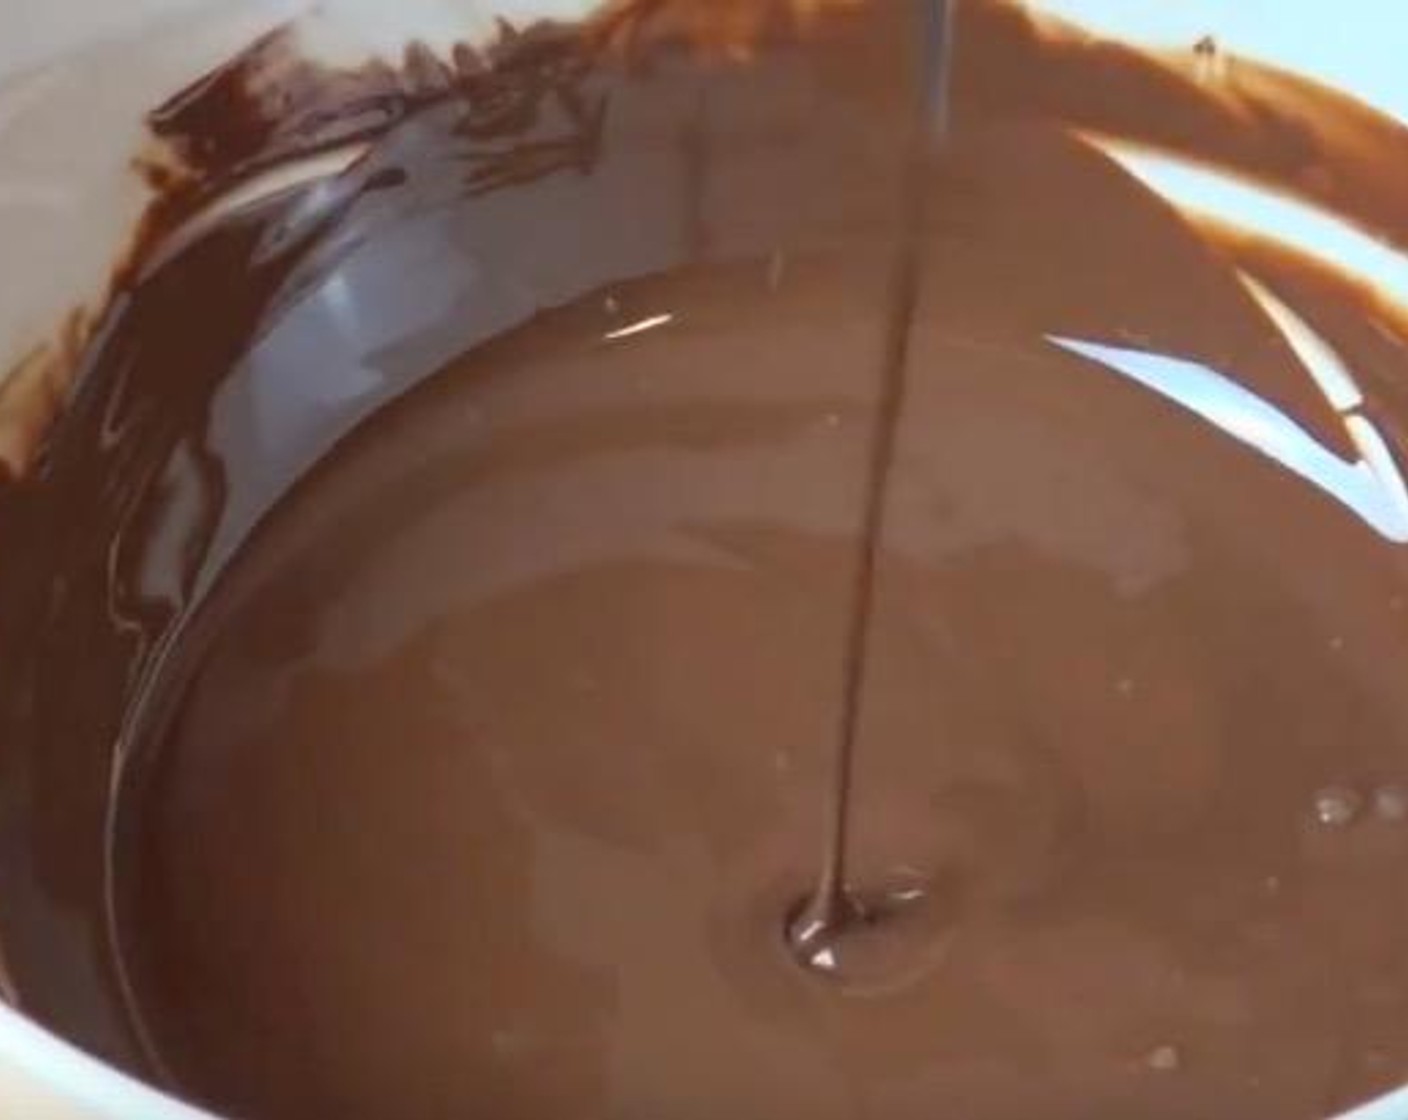 step 2 Put Chocolate (1 cup) into a bowl and melt it using a microwave oven. Put it in 20 to 30 seconds a time and take it out to give it a stir by using a metal spoon. Put it back for another 20 to 30 seconds and keep repeating until it's melted and smooth. Add Vegetable Oil (2 Tbsp) into the chocolate and mix it up until it is nicely combined. Cool it for a minute or 2.